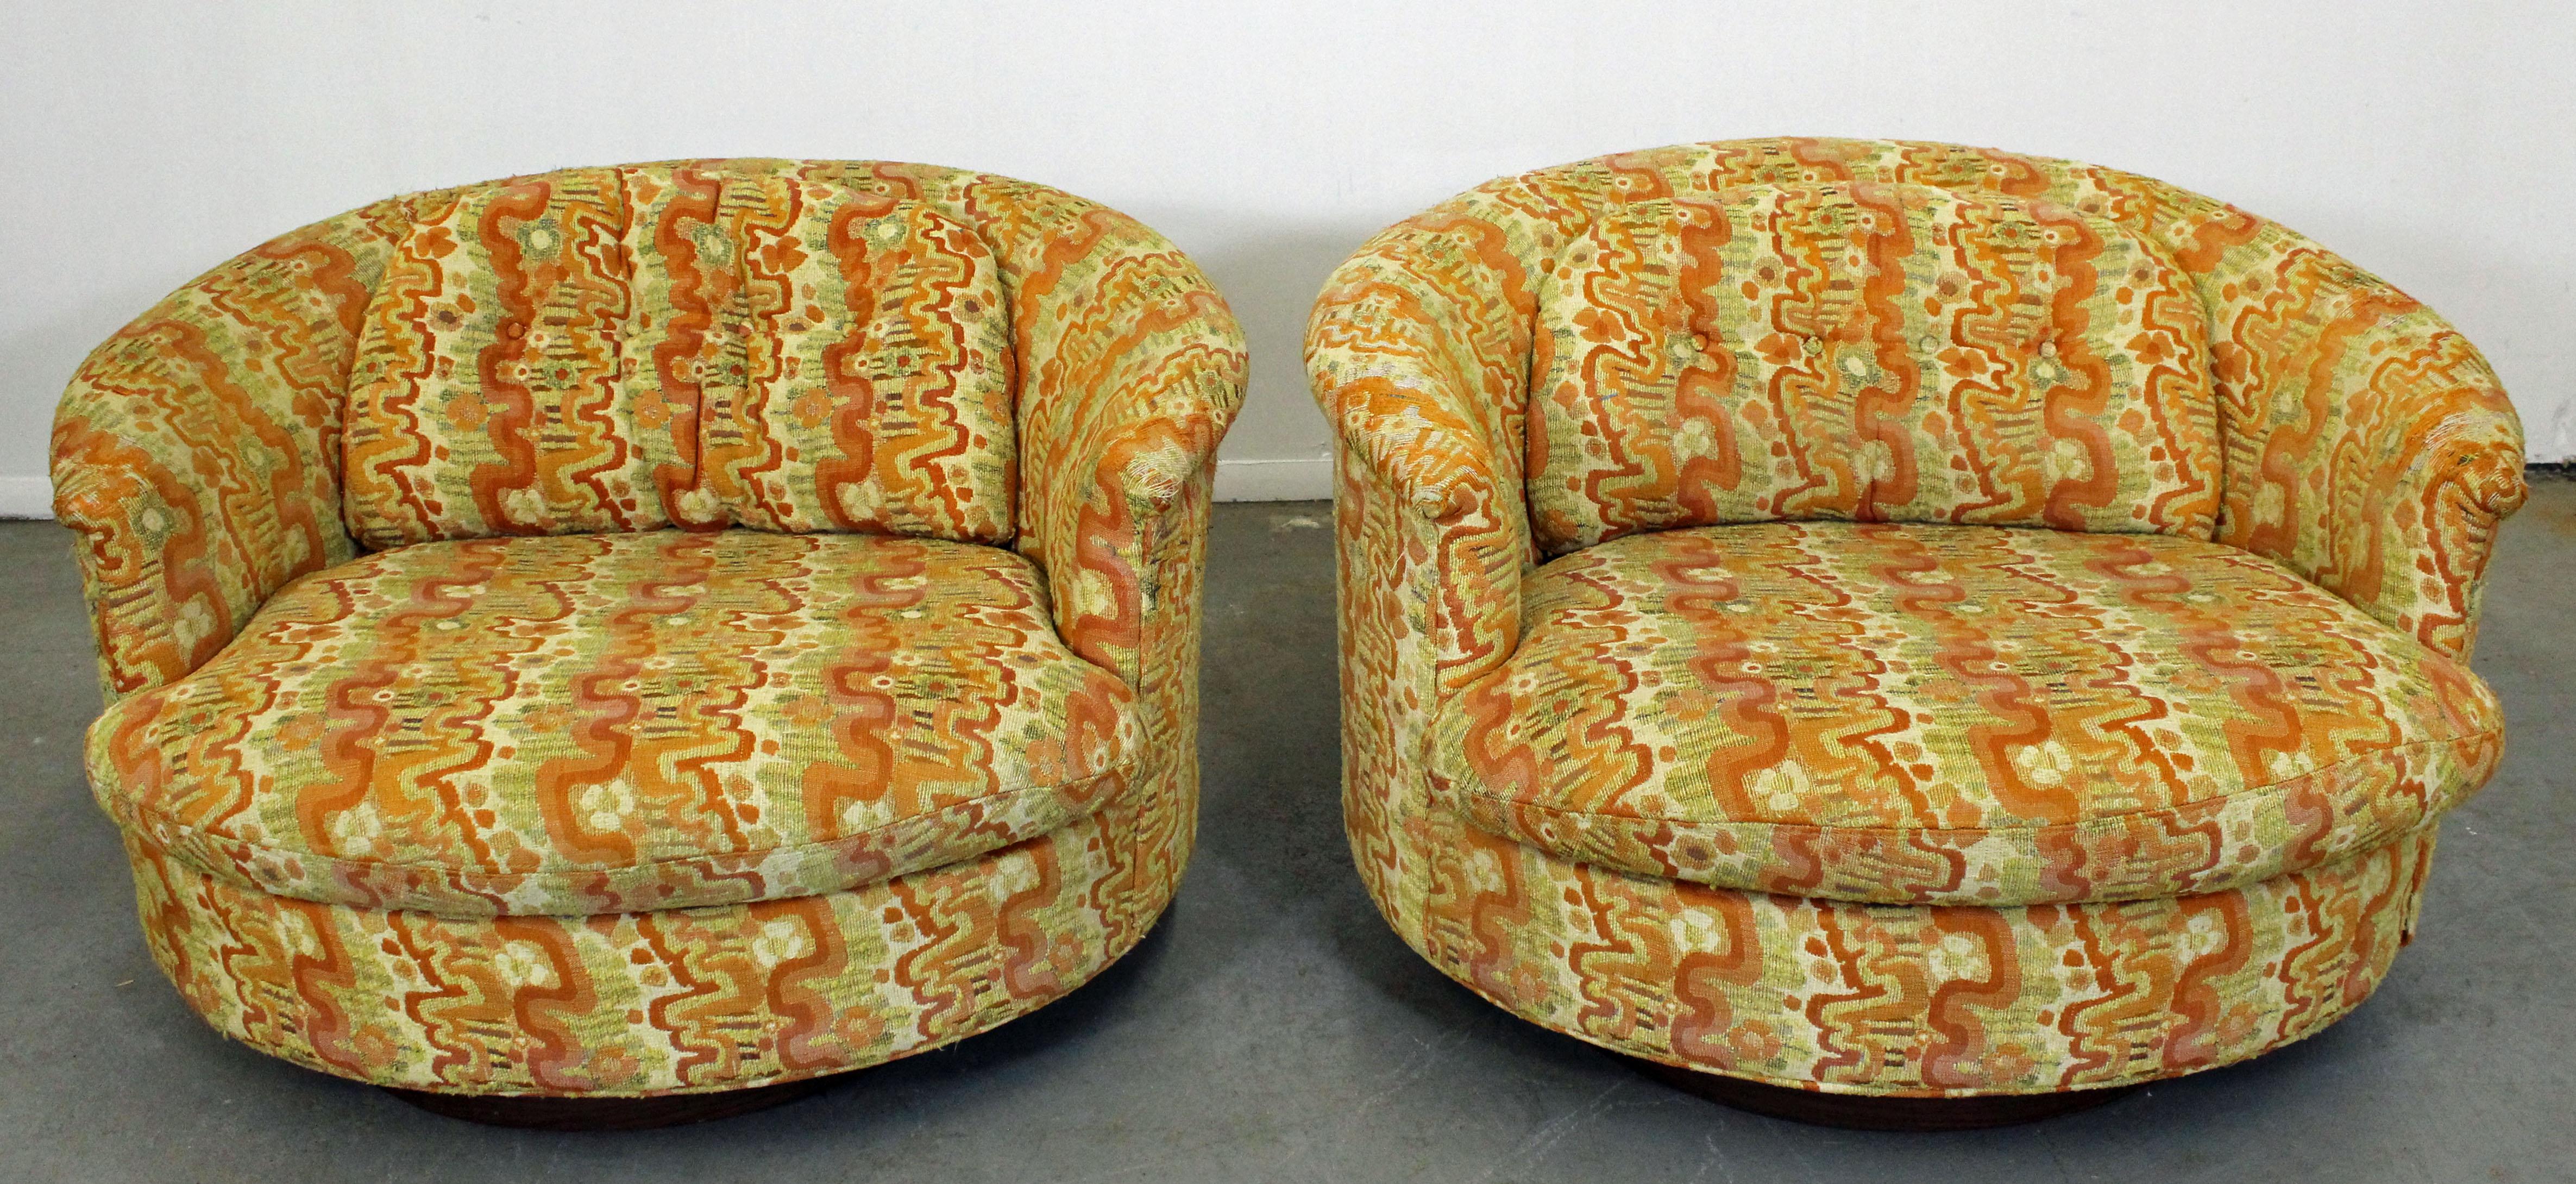 What a find. Offered is a pair of groovy, round swivel chairs on wooden bases, by Selig Imperial. They are in decent condition, but need to be reupholstered. They are signed by Selig Imperial.

Dimensions:
40